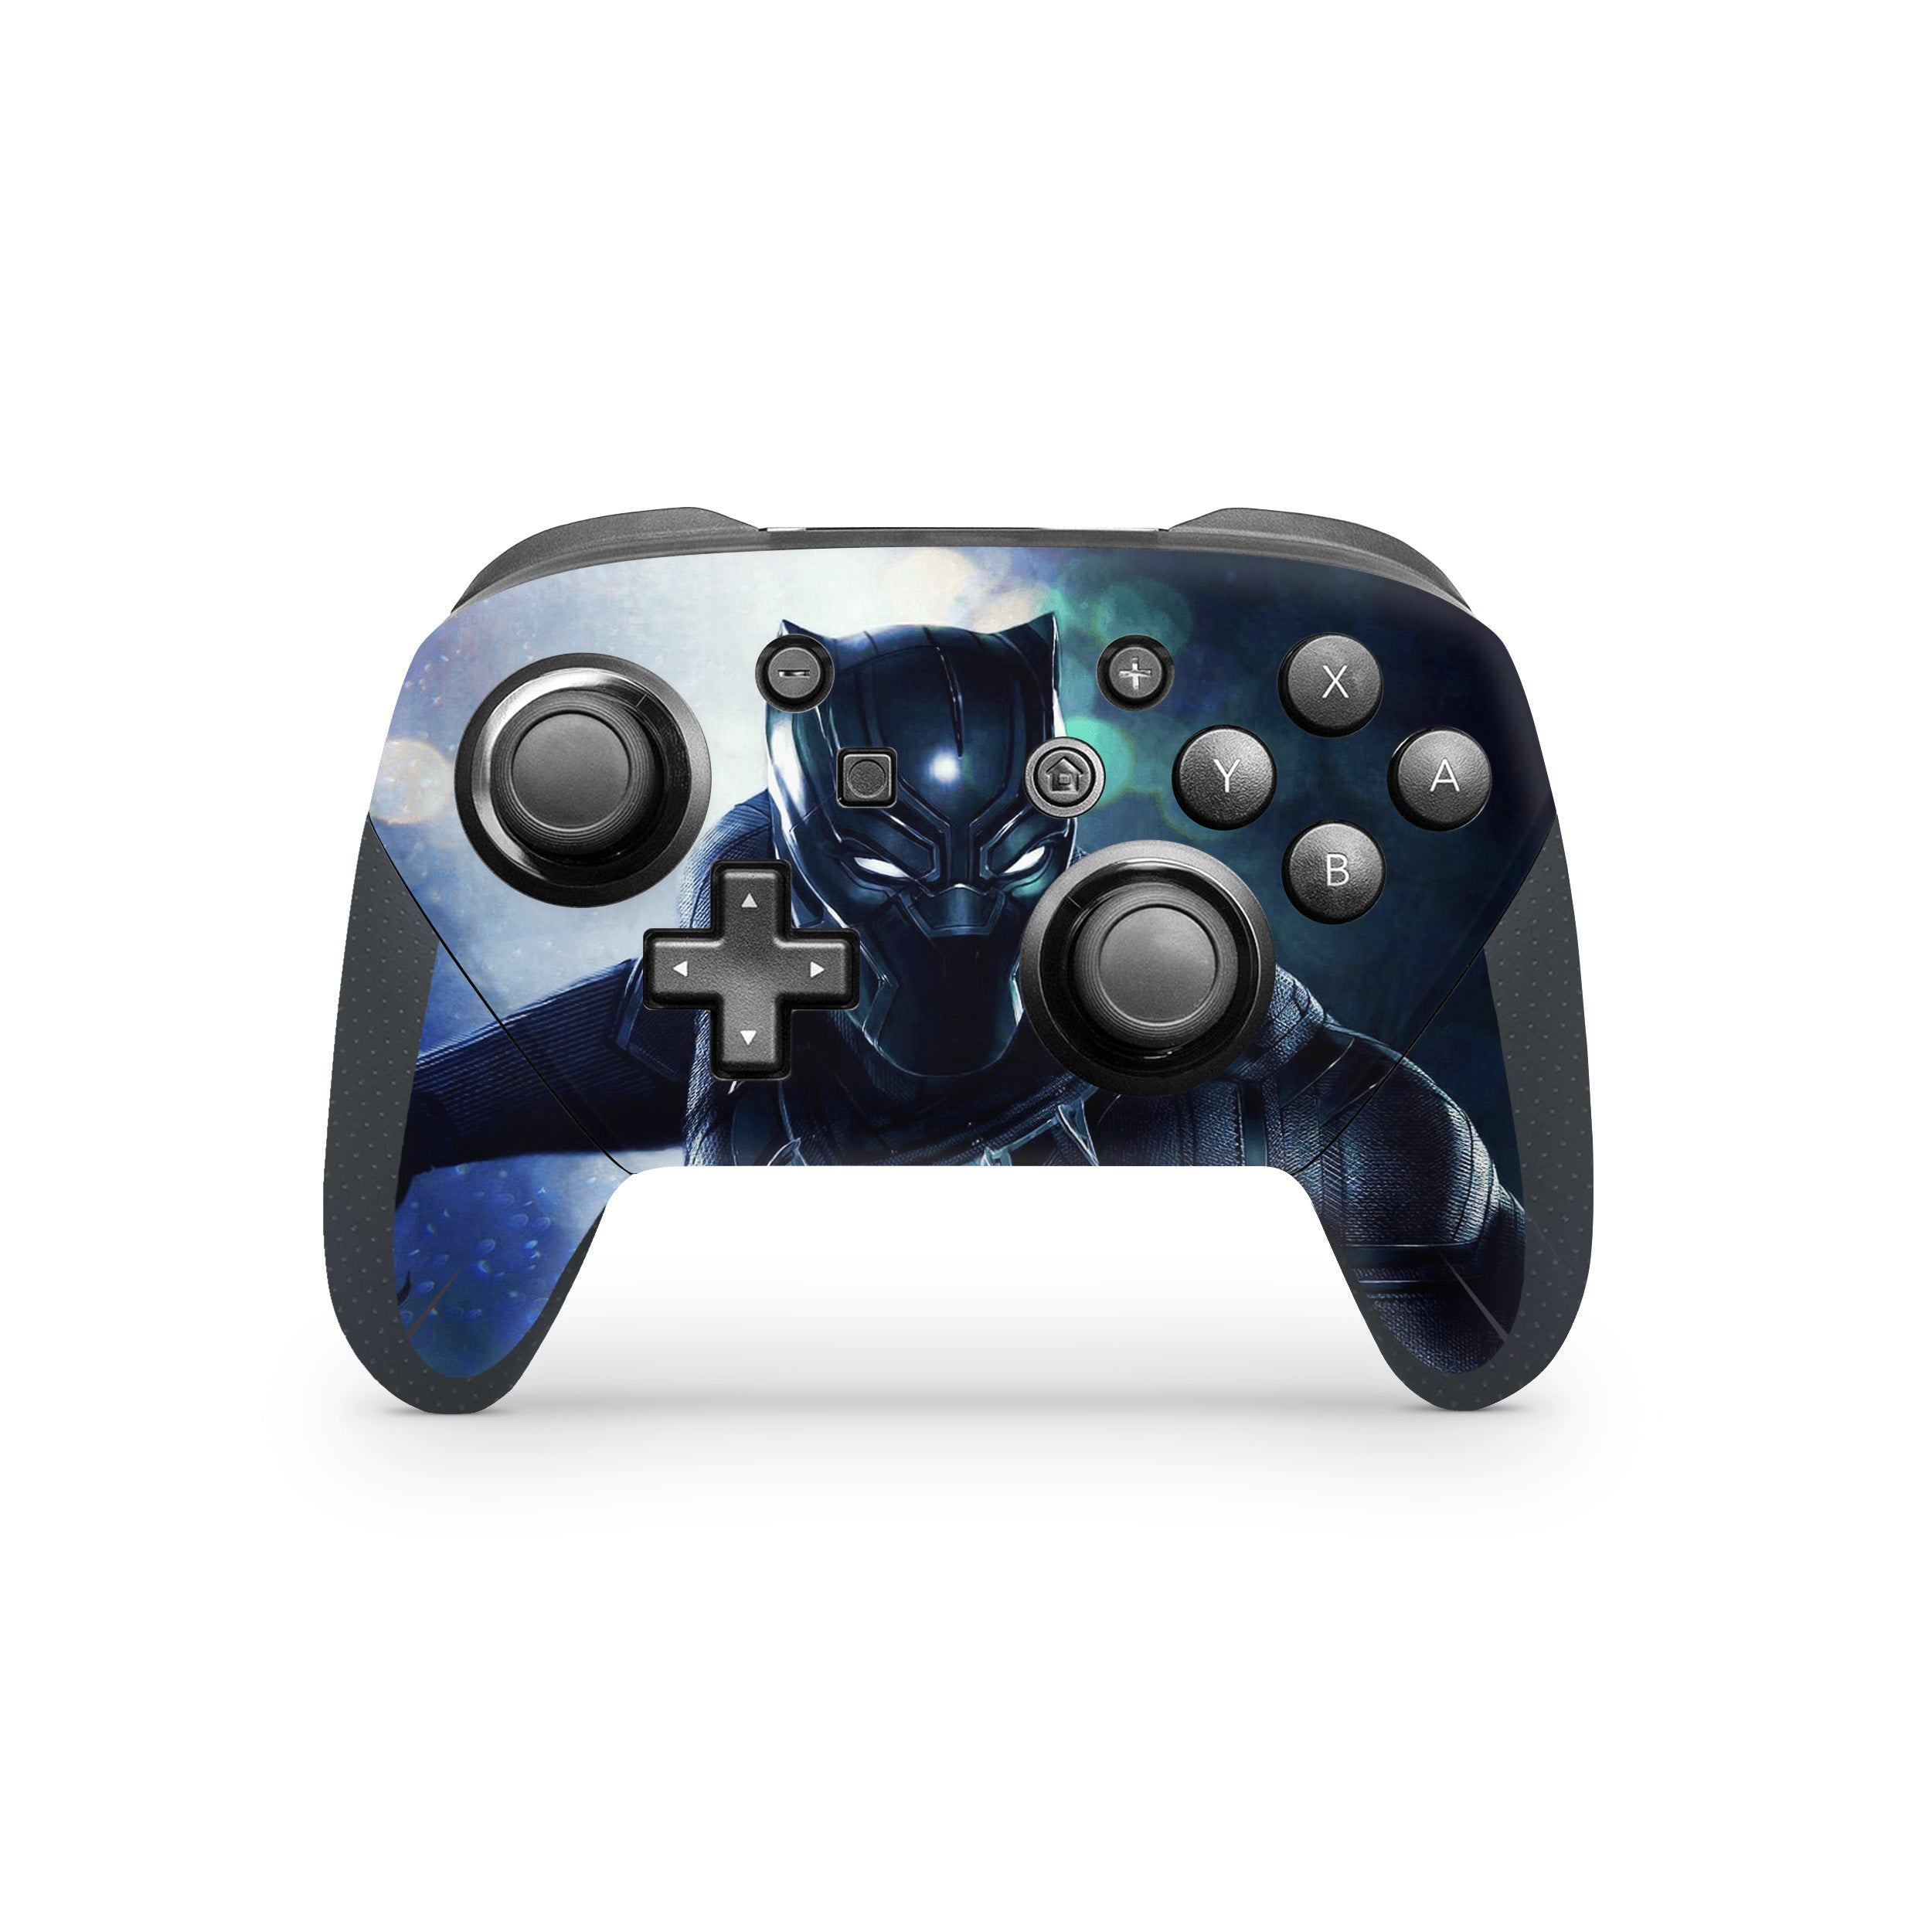 A video game skin featuring a Marvel Black Panther design for the Switch Pro Controller.